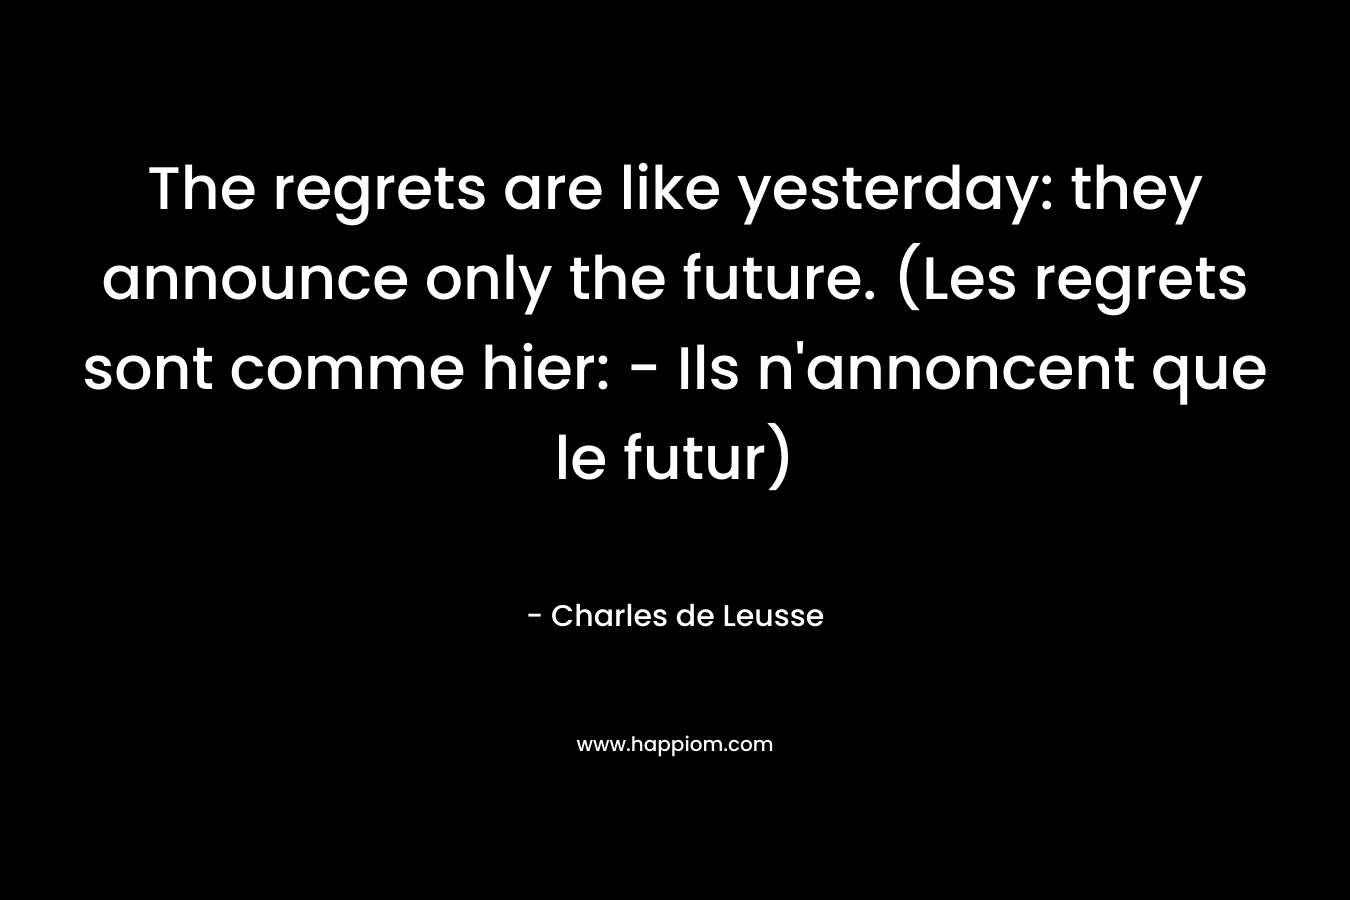 The regrets are like yesterday: they announce only the future. (Les regrets sont comme hier: - Ils n'annoncent que le futur)